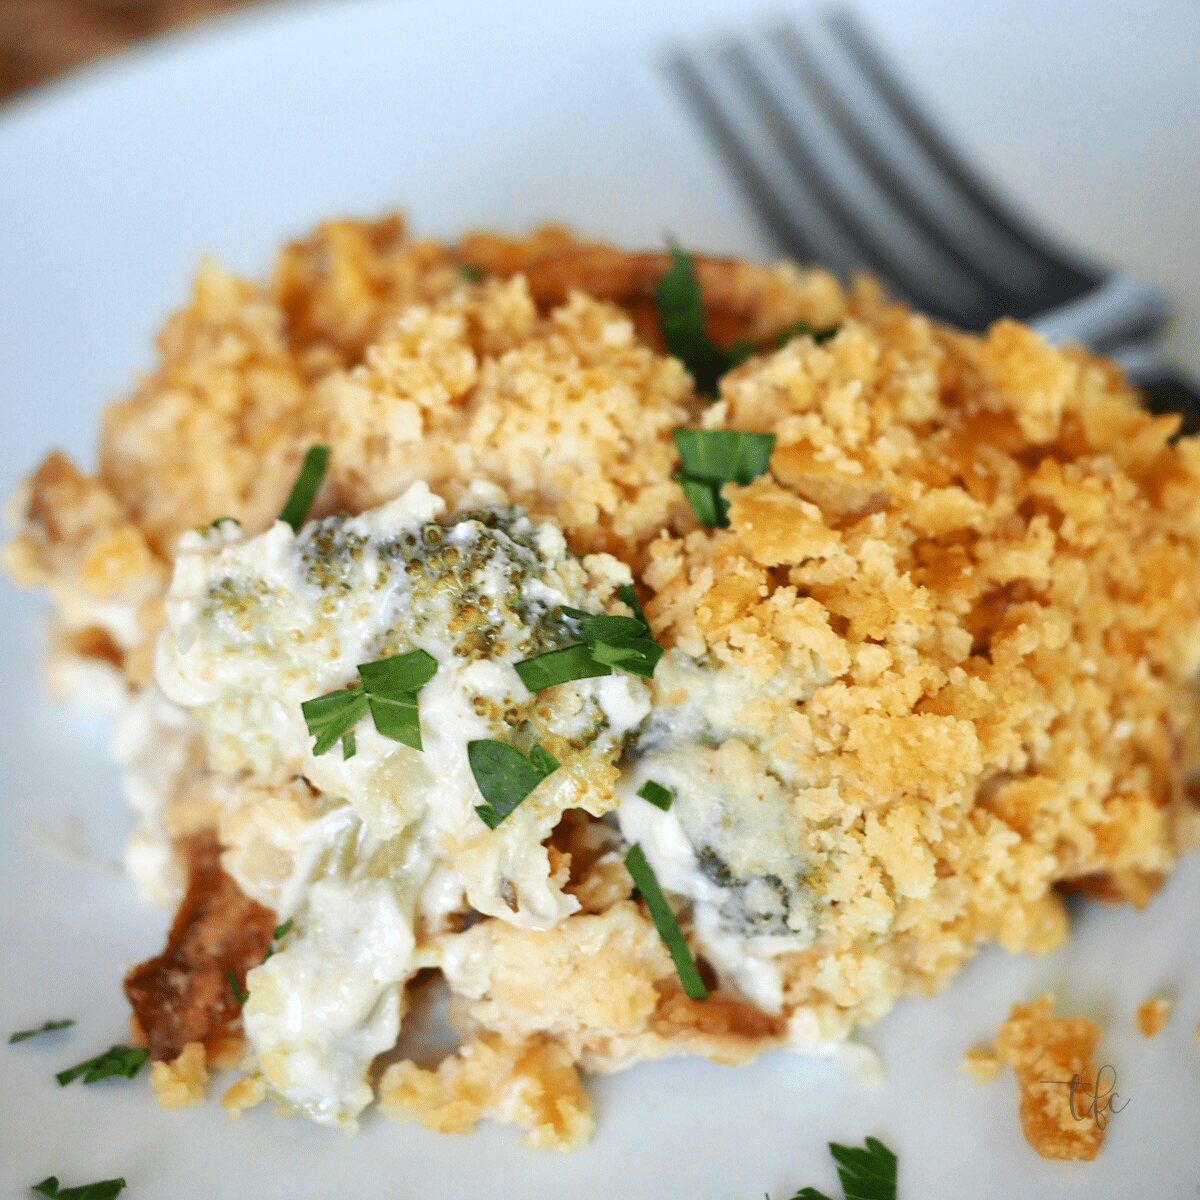 Chicken Divan on a plate with a fork, showing a buttery crumb topping.